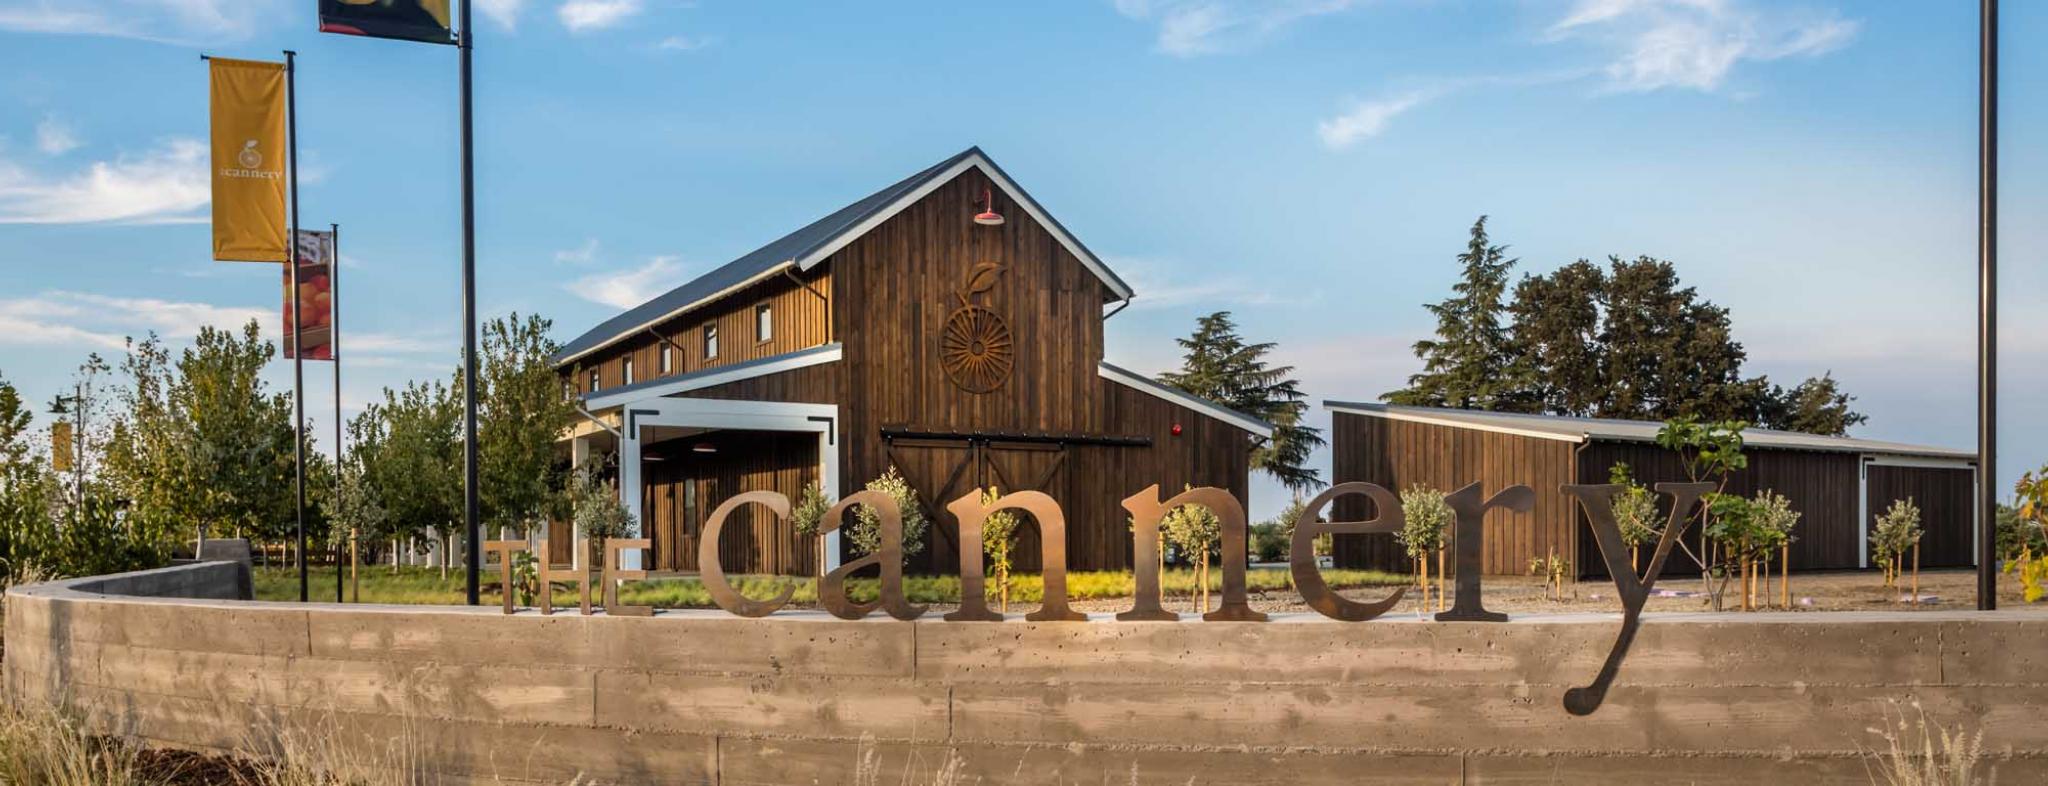 The New Home Company Wins Top Honor with Residential Housing Community of the Year at 2016 Gold Nugget Awards at PCBC in San Francisco